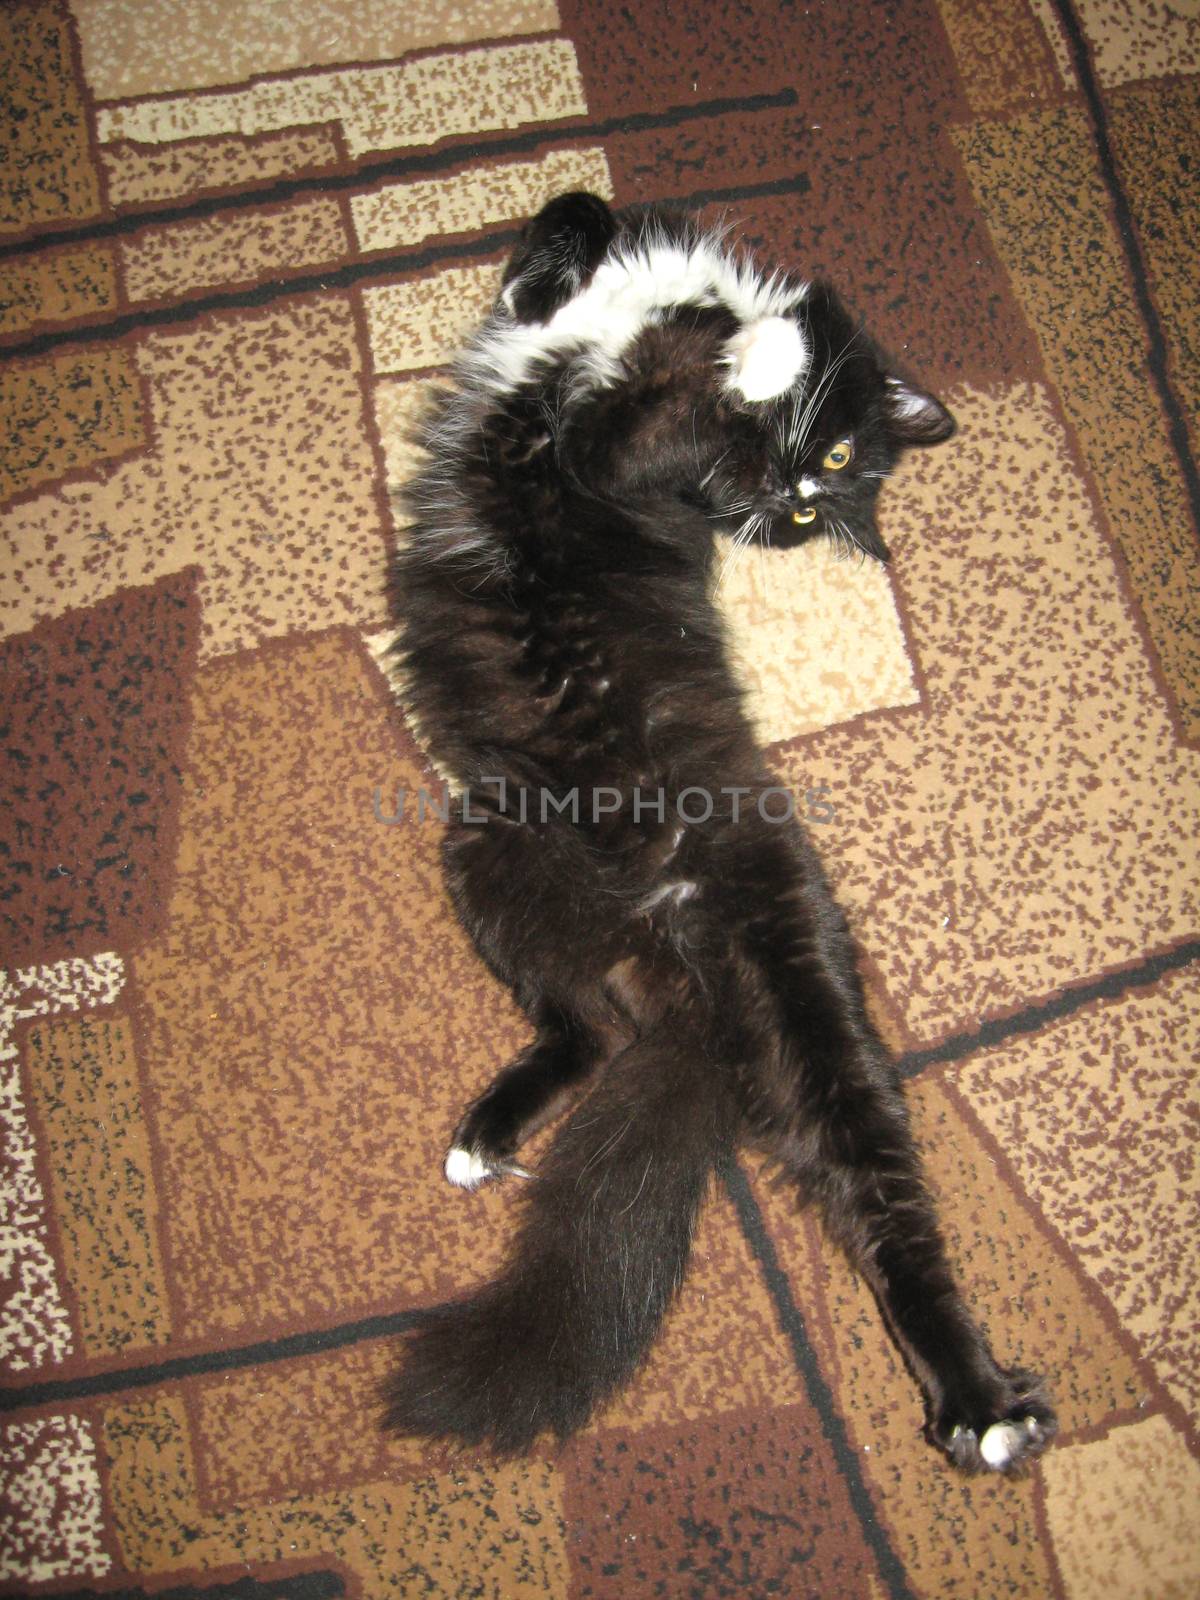 black cat lolling about on the carpet by alexmak